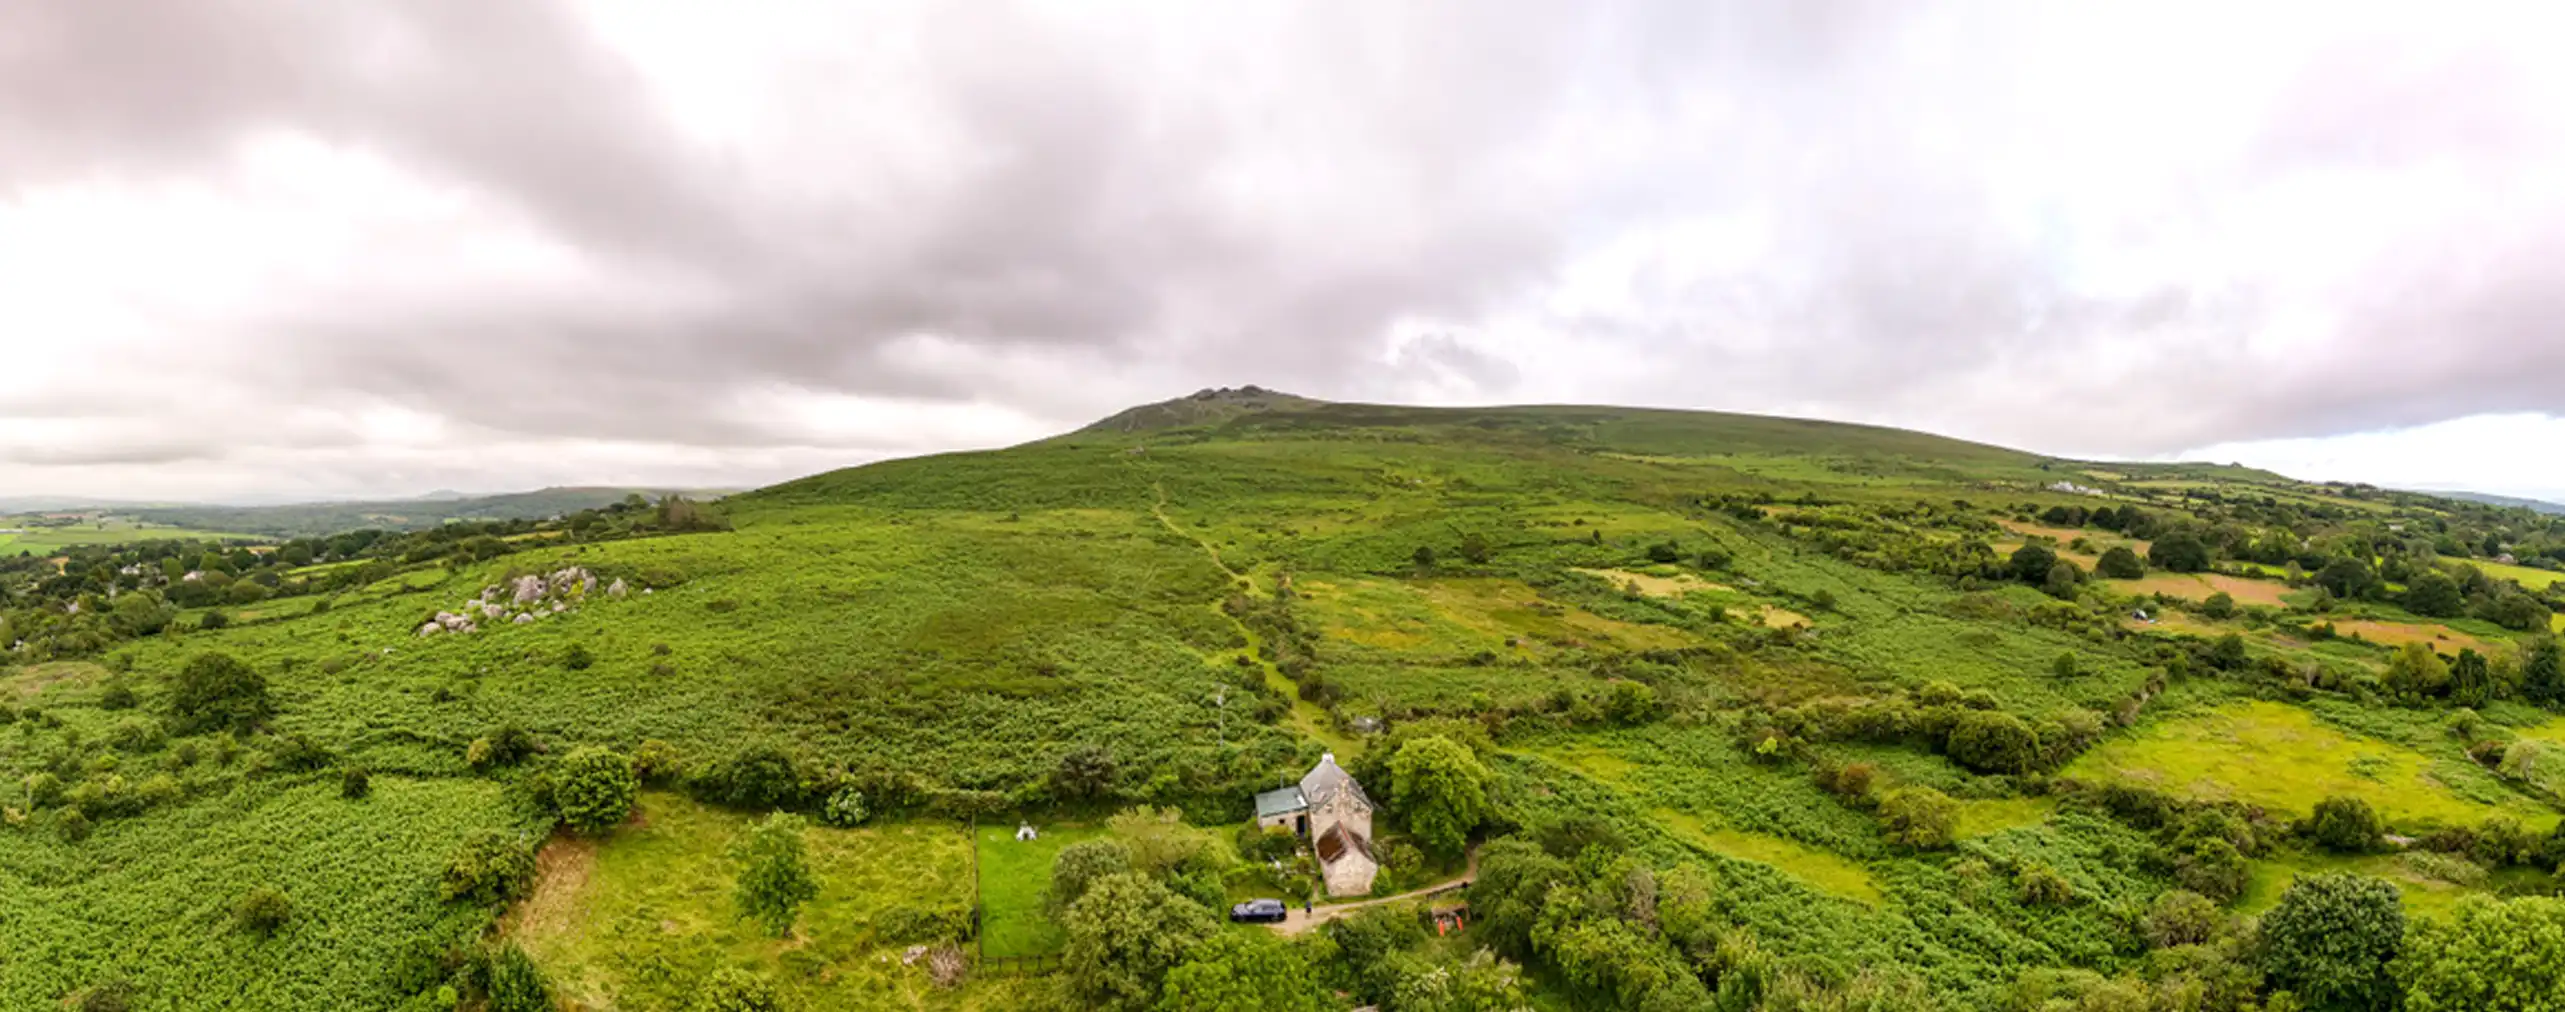 Panoramic, showing Penfiedr Newydd on Carningli Mountain